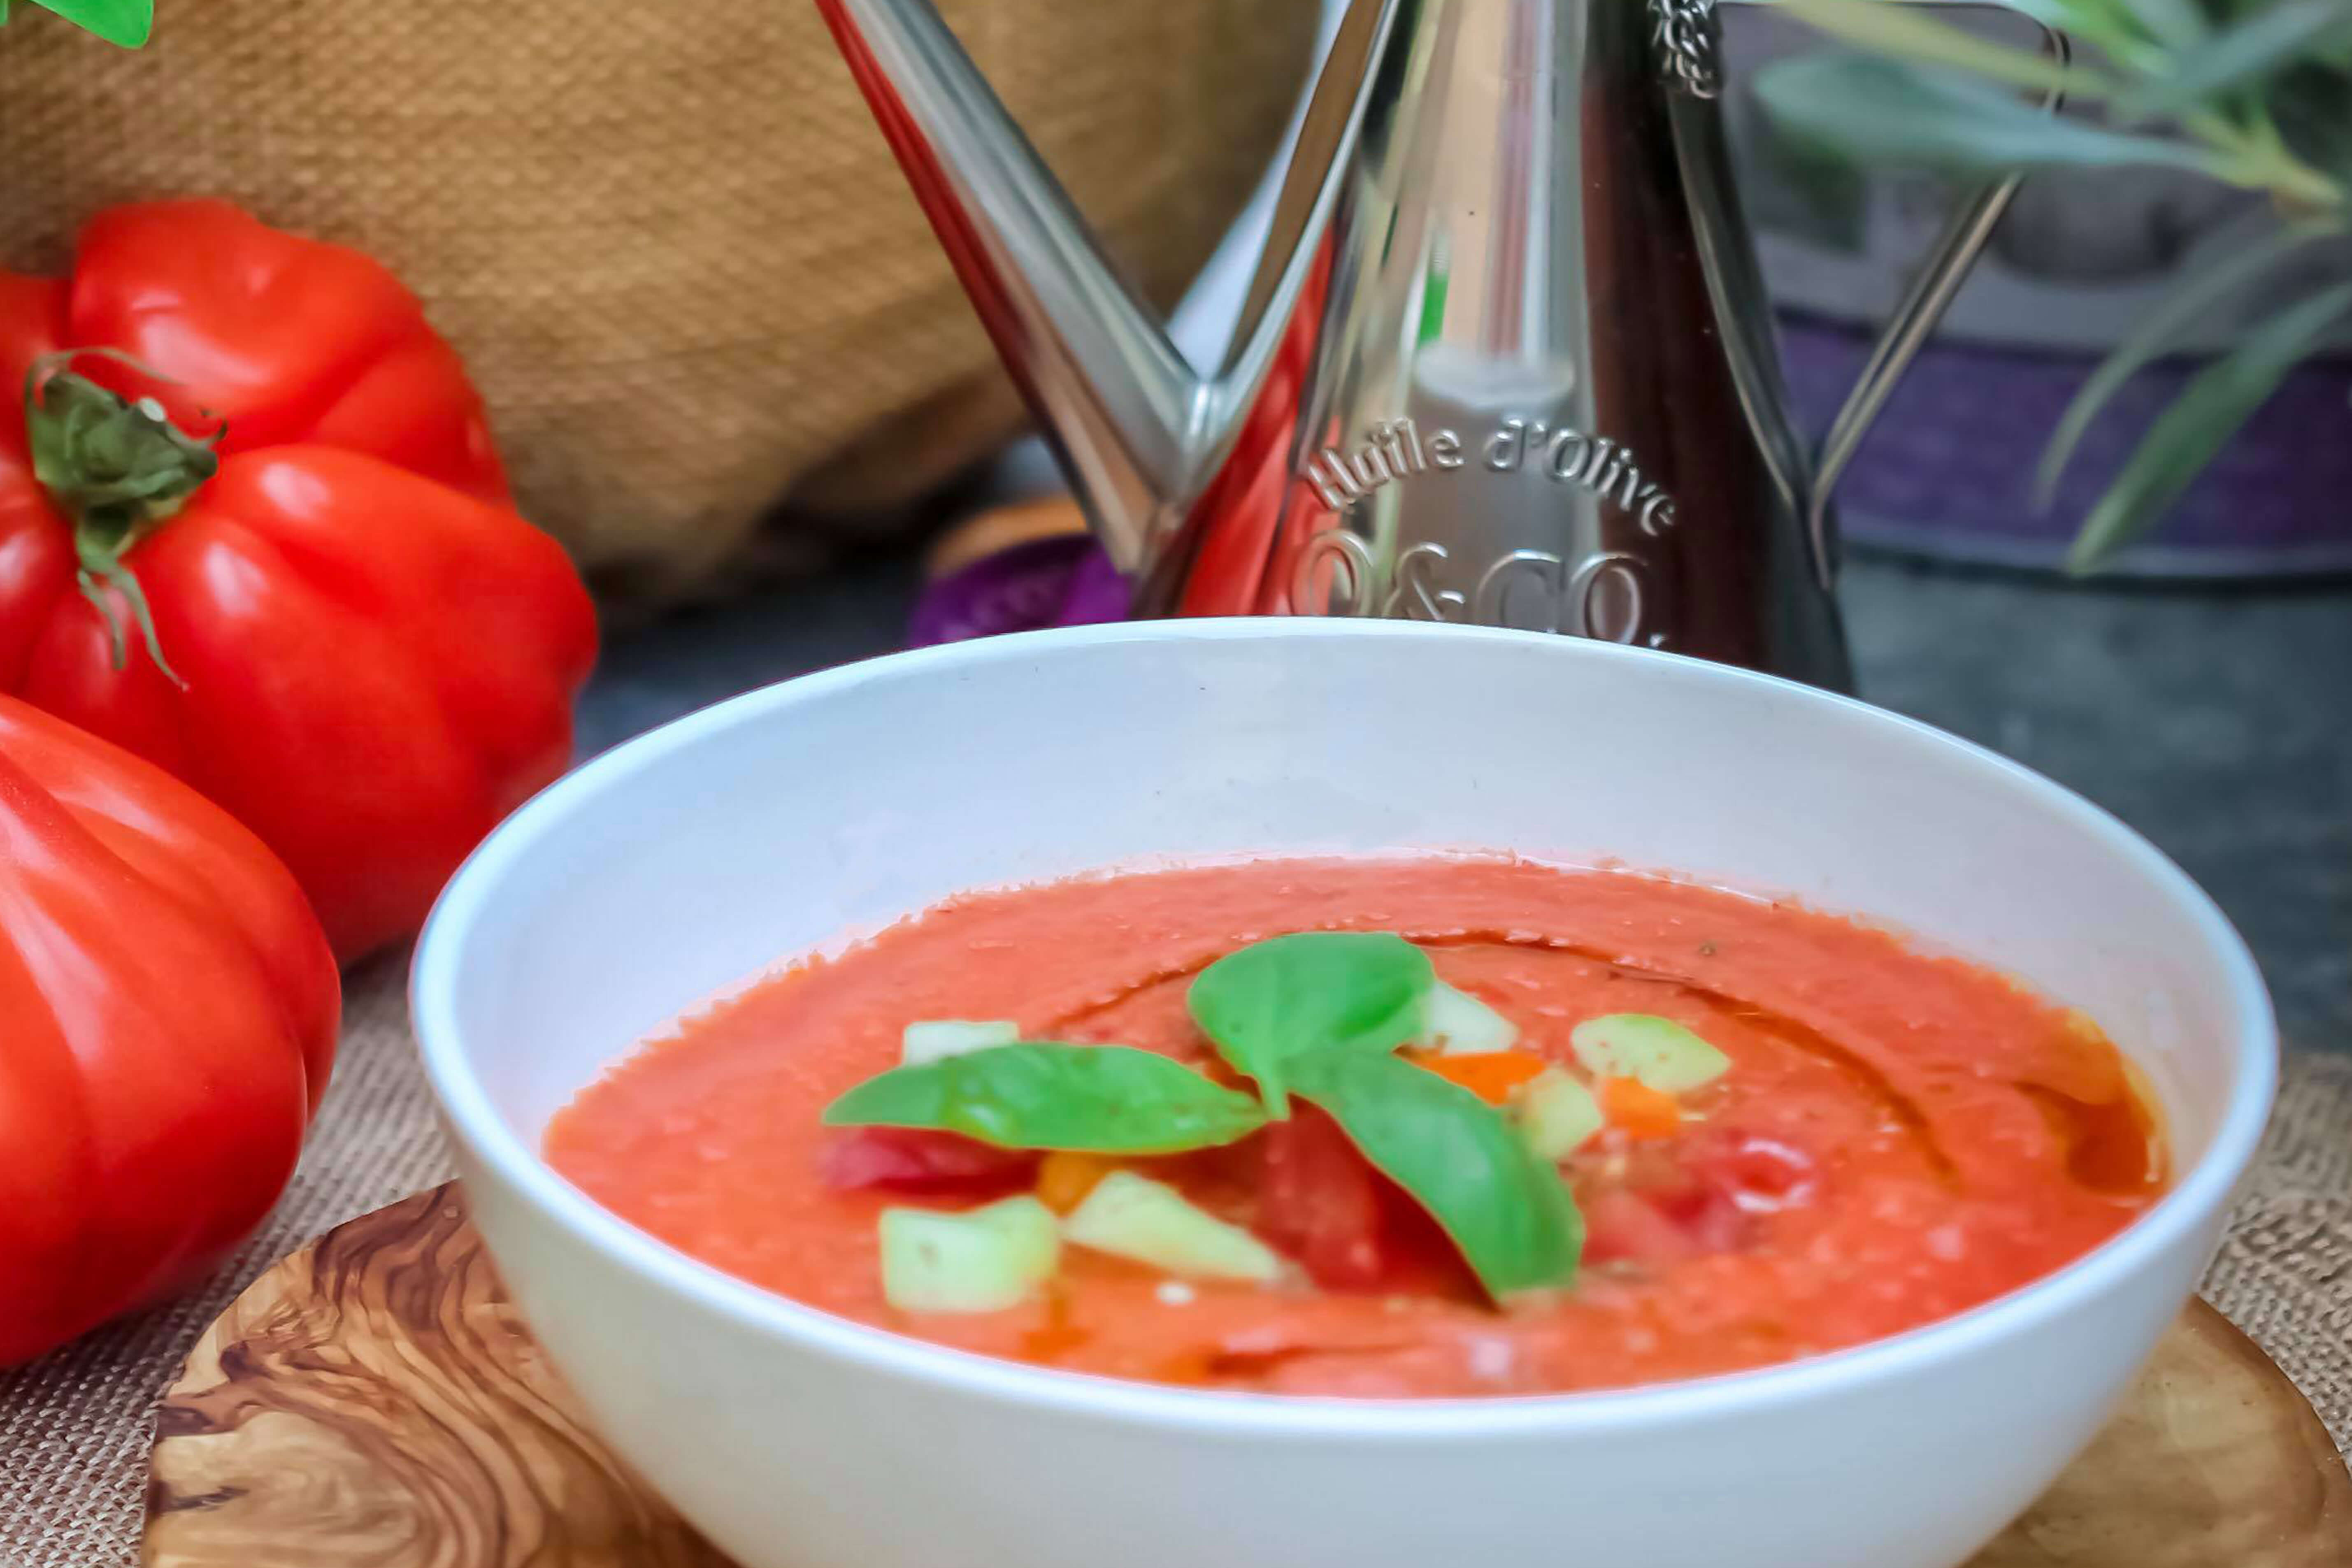 gazpacho is one of our healthy spanish dishes